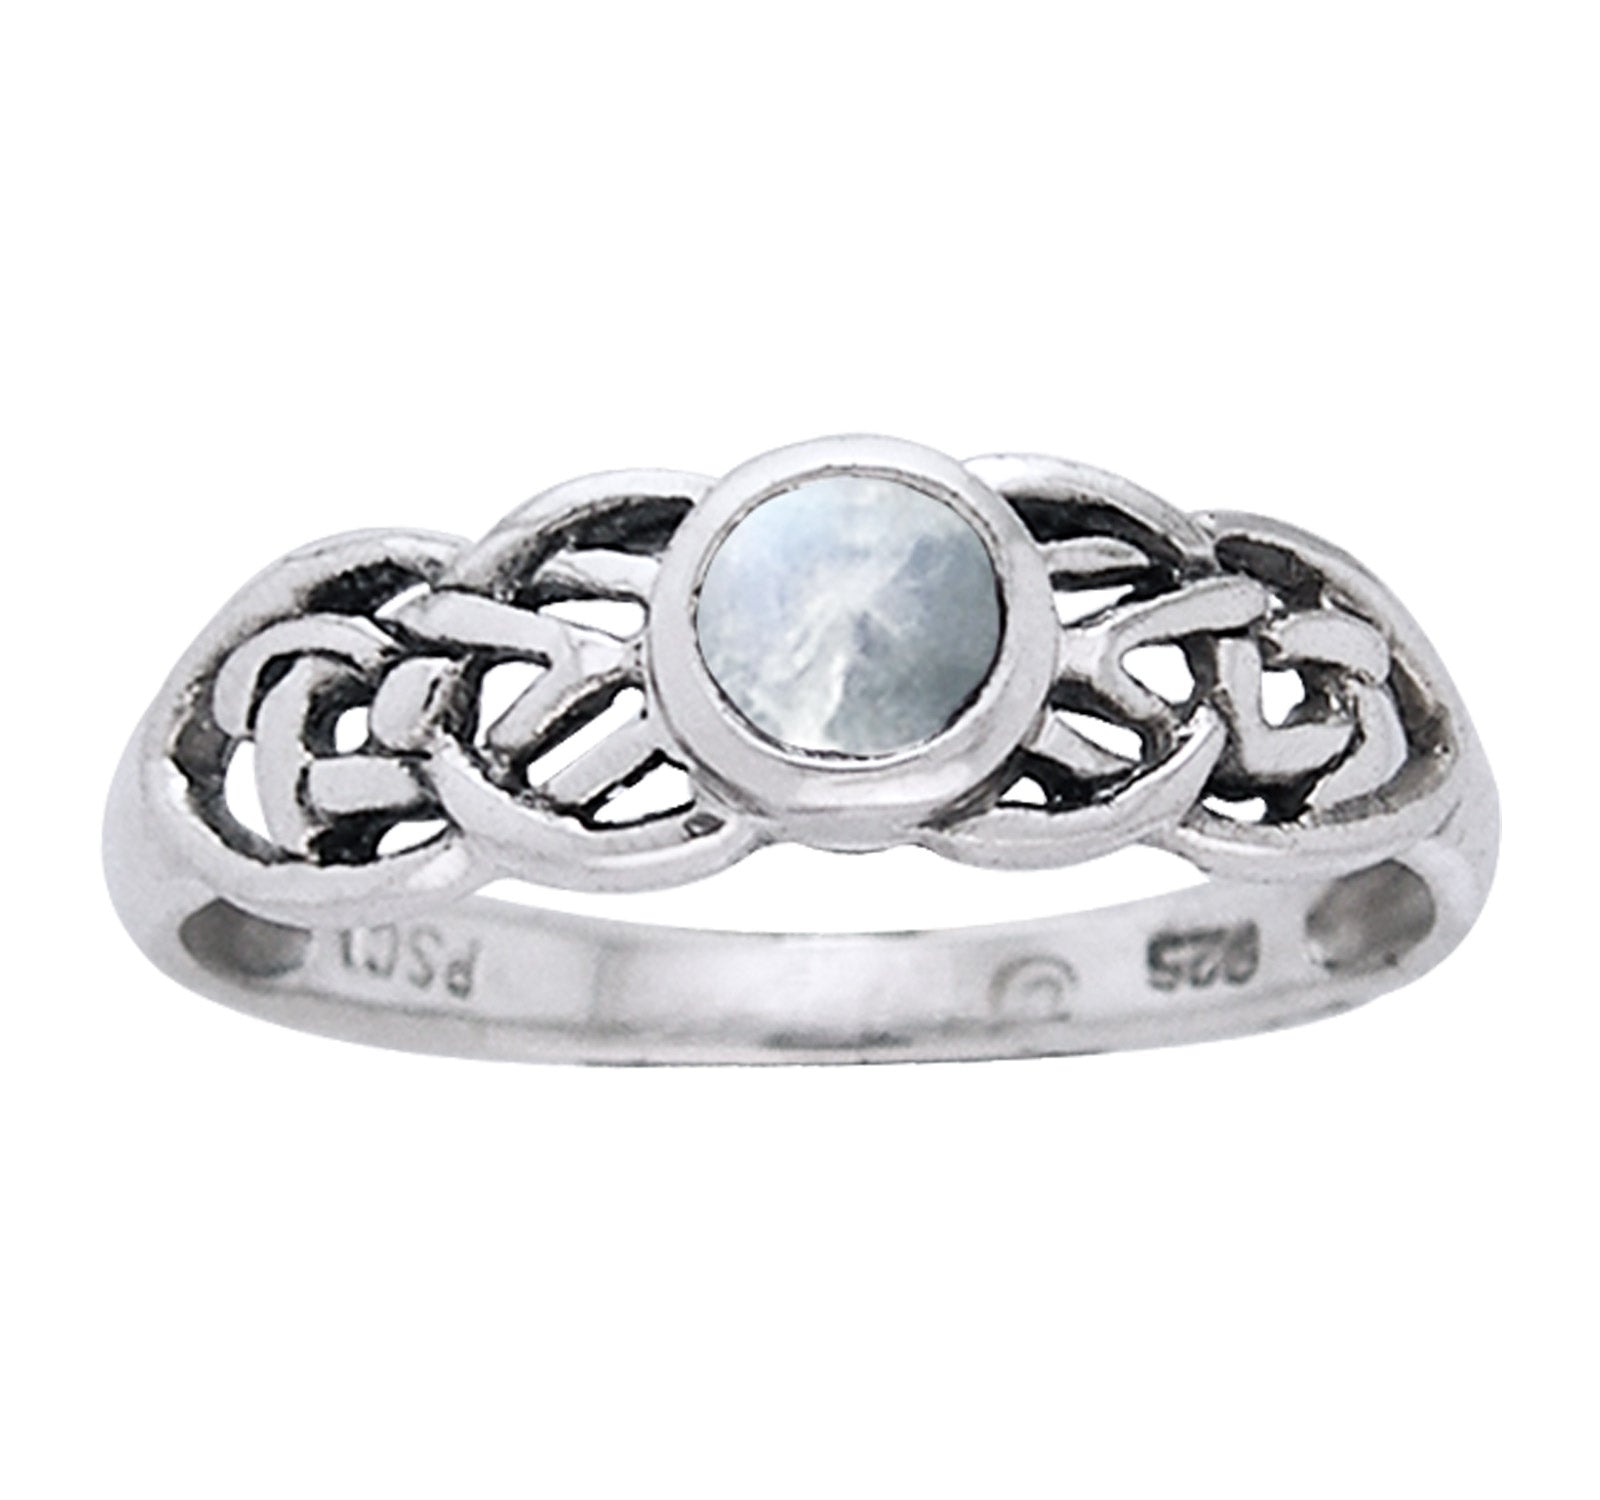 Petite Celtic Knot Birthstone Ring Sterling Silver Genuine Rainbow Moonstone For June - Silver Insanity